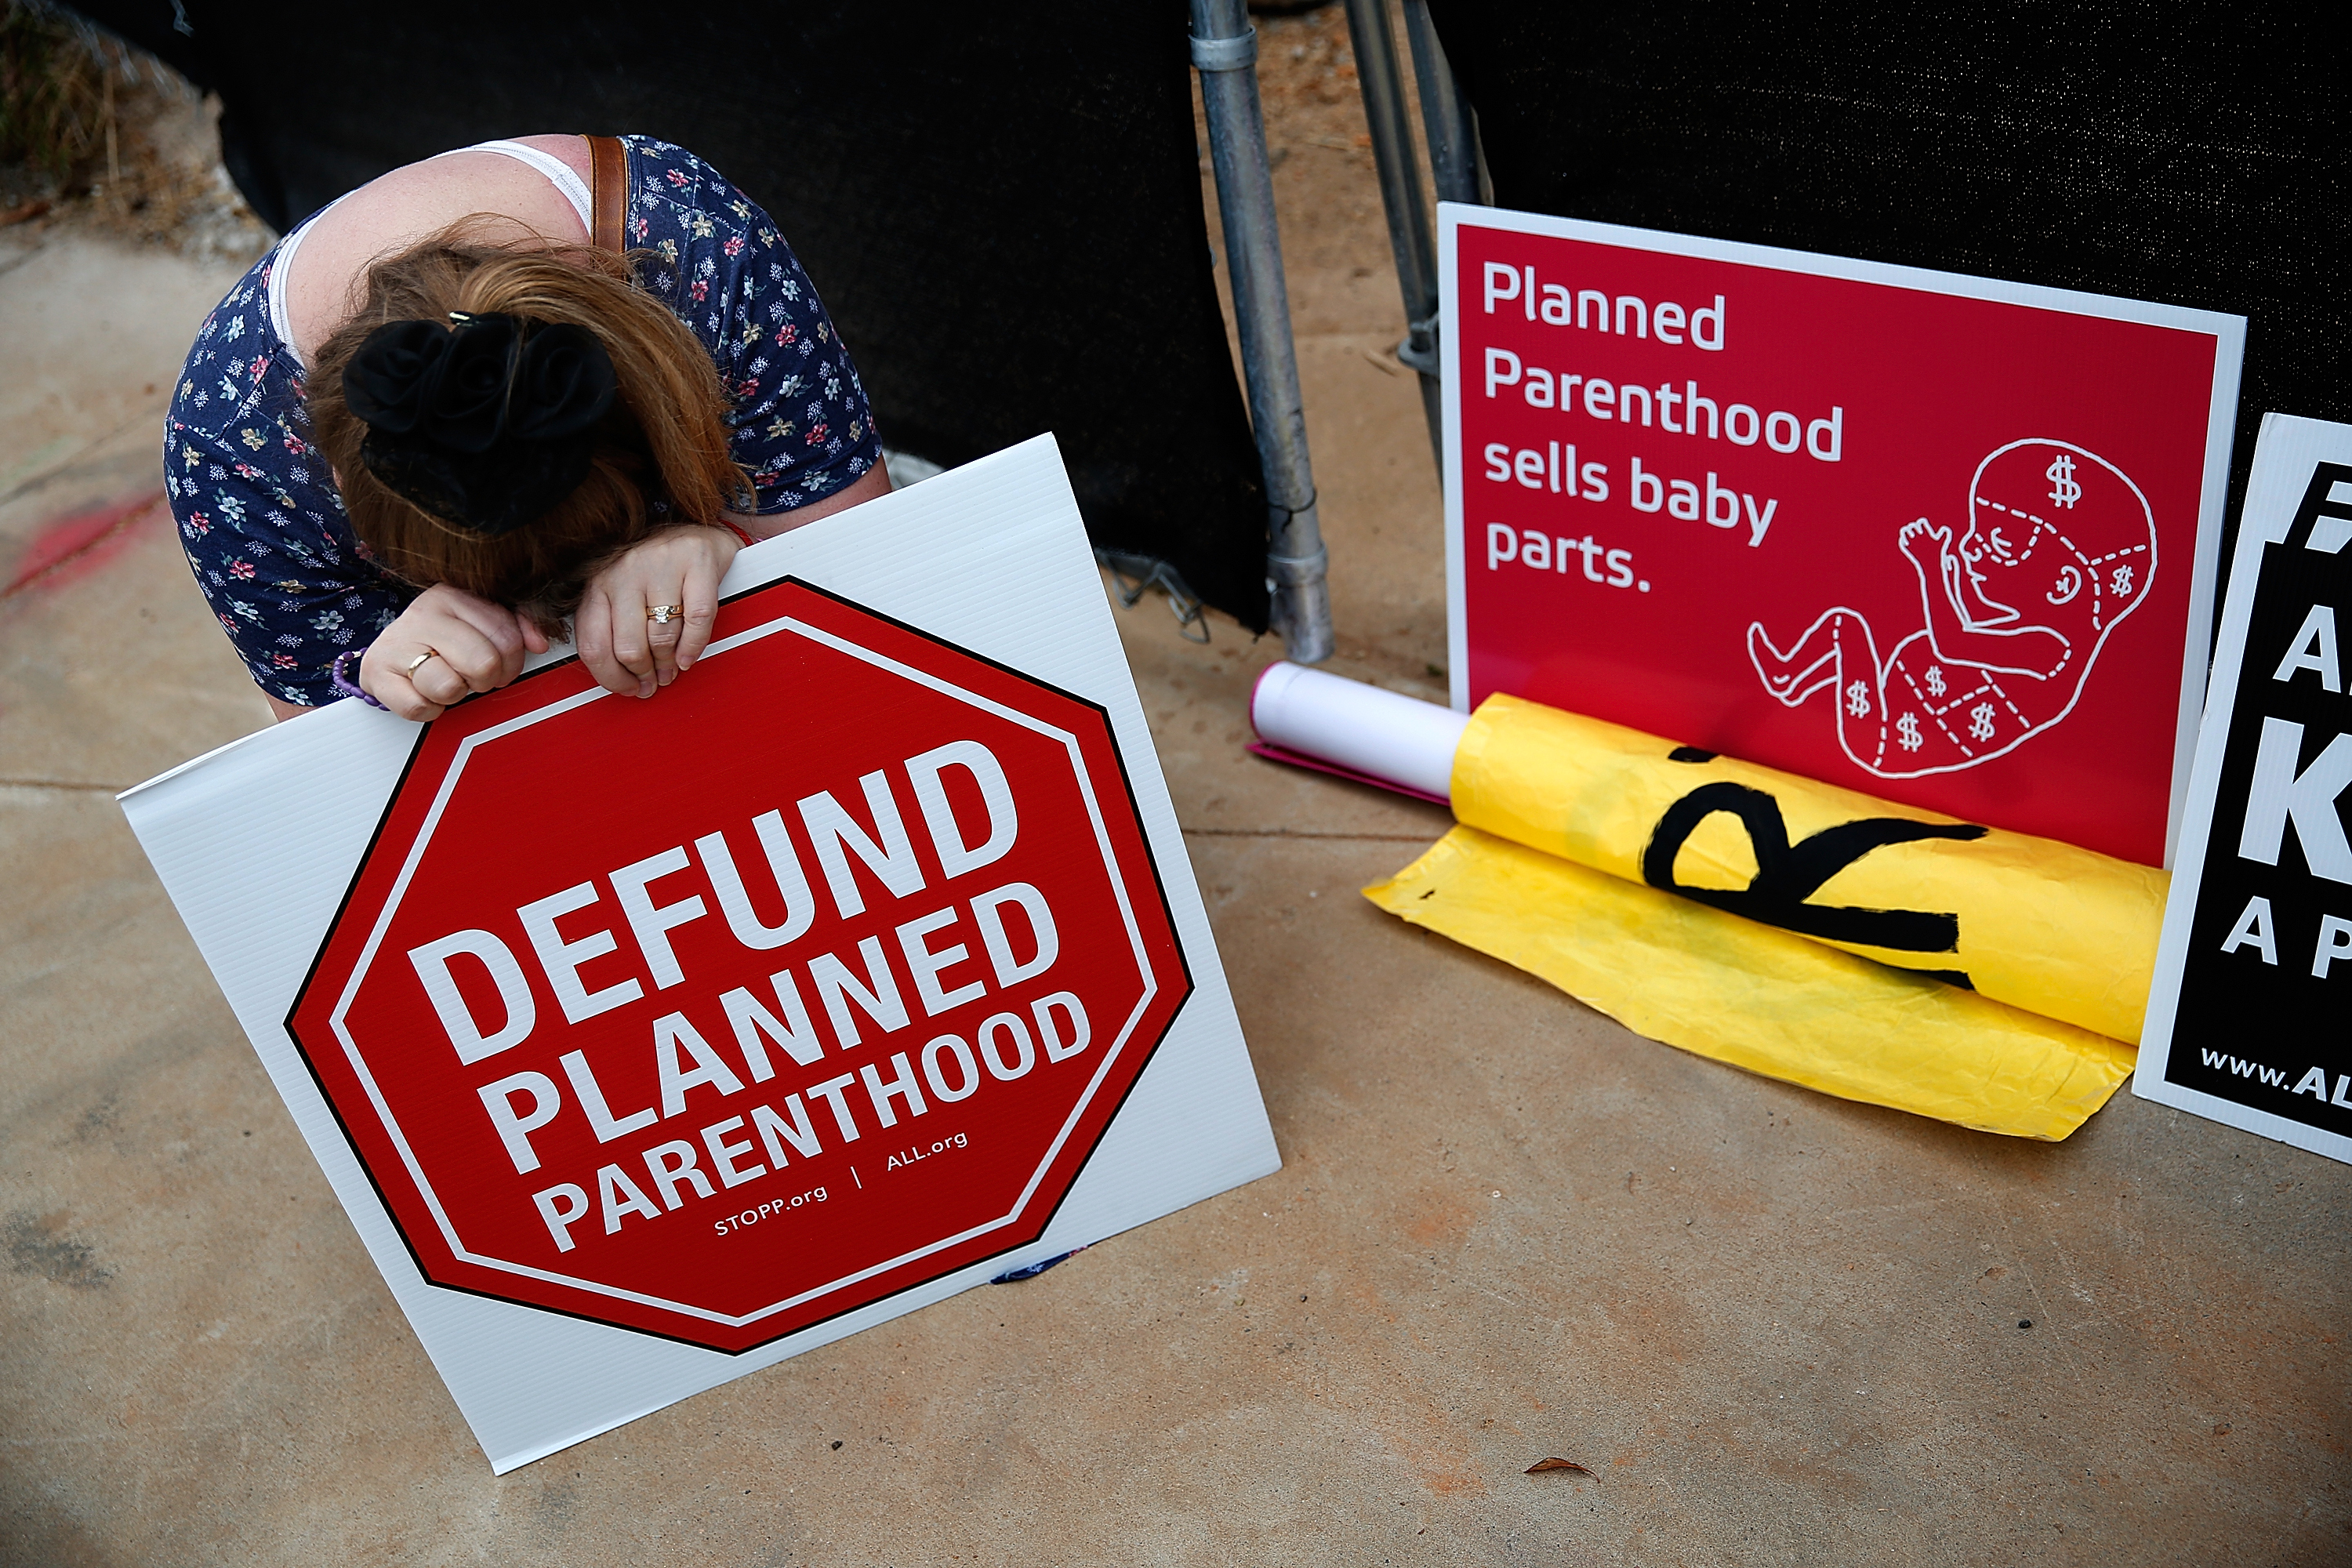 Right to Life advocate Linda Heilman prays during a sit-in in front of a proposed Planned Parenthood location while demonstrating the group's opposition to congressional funding of Planned Parenthood in Washington, DC, on Sept. 21, 2015. (Win McNamee—Getty Images)